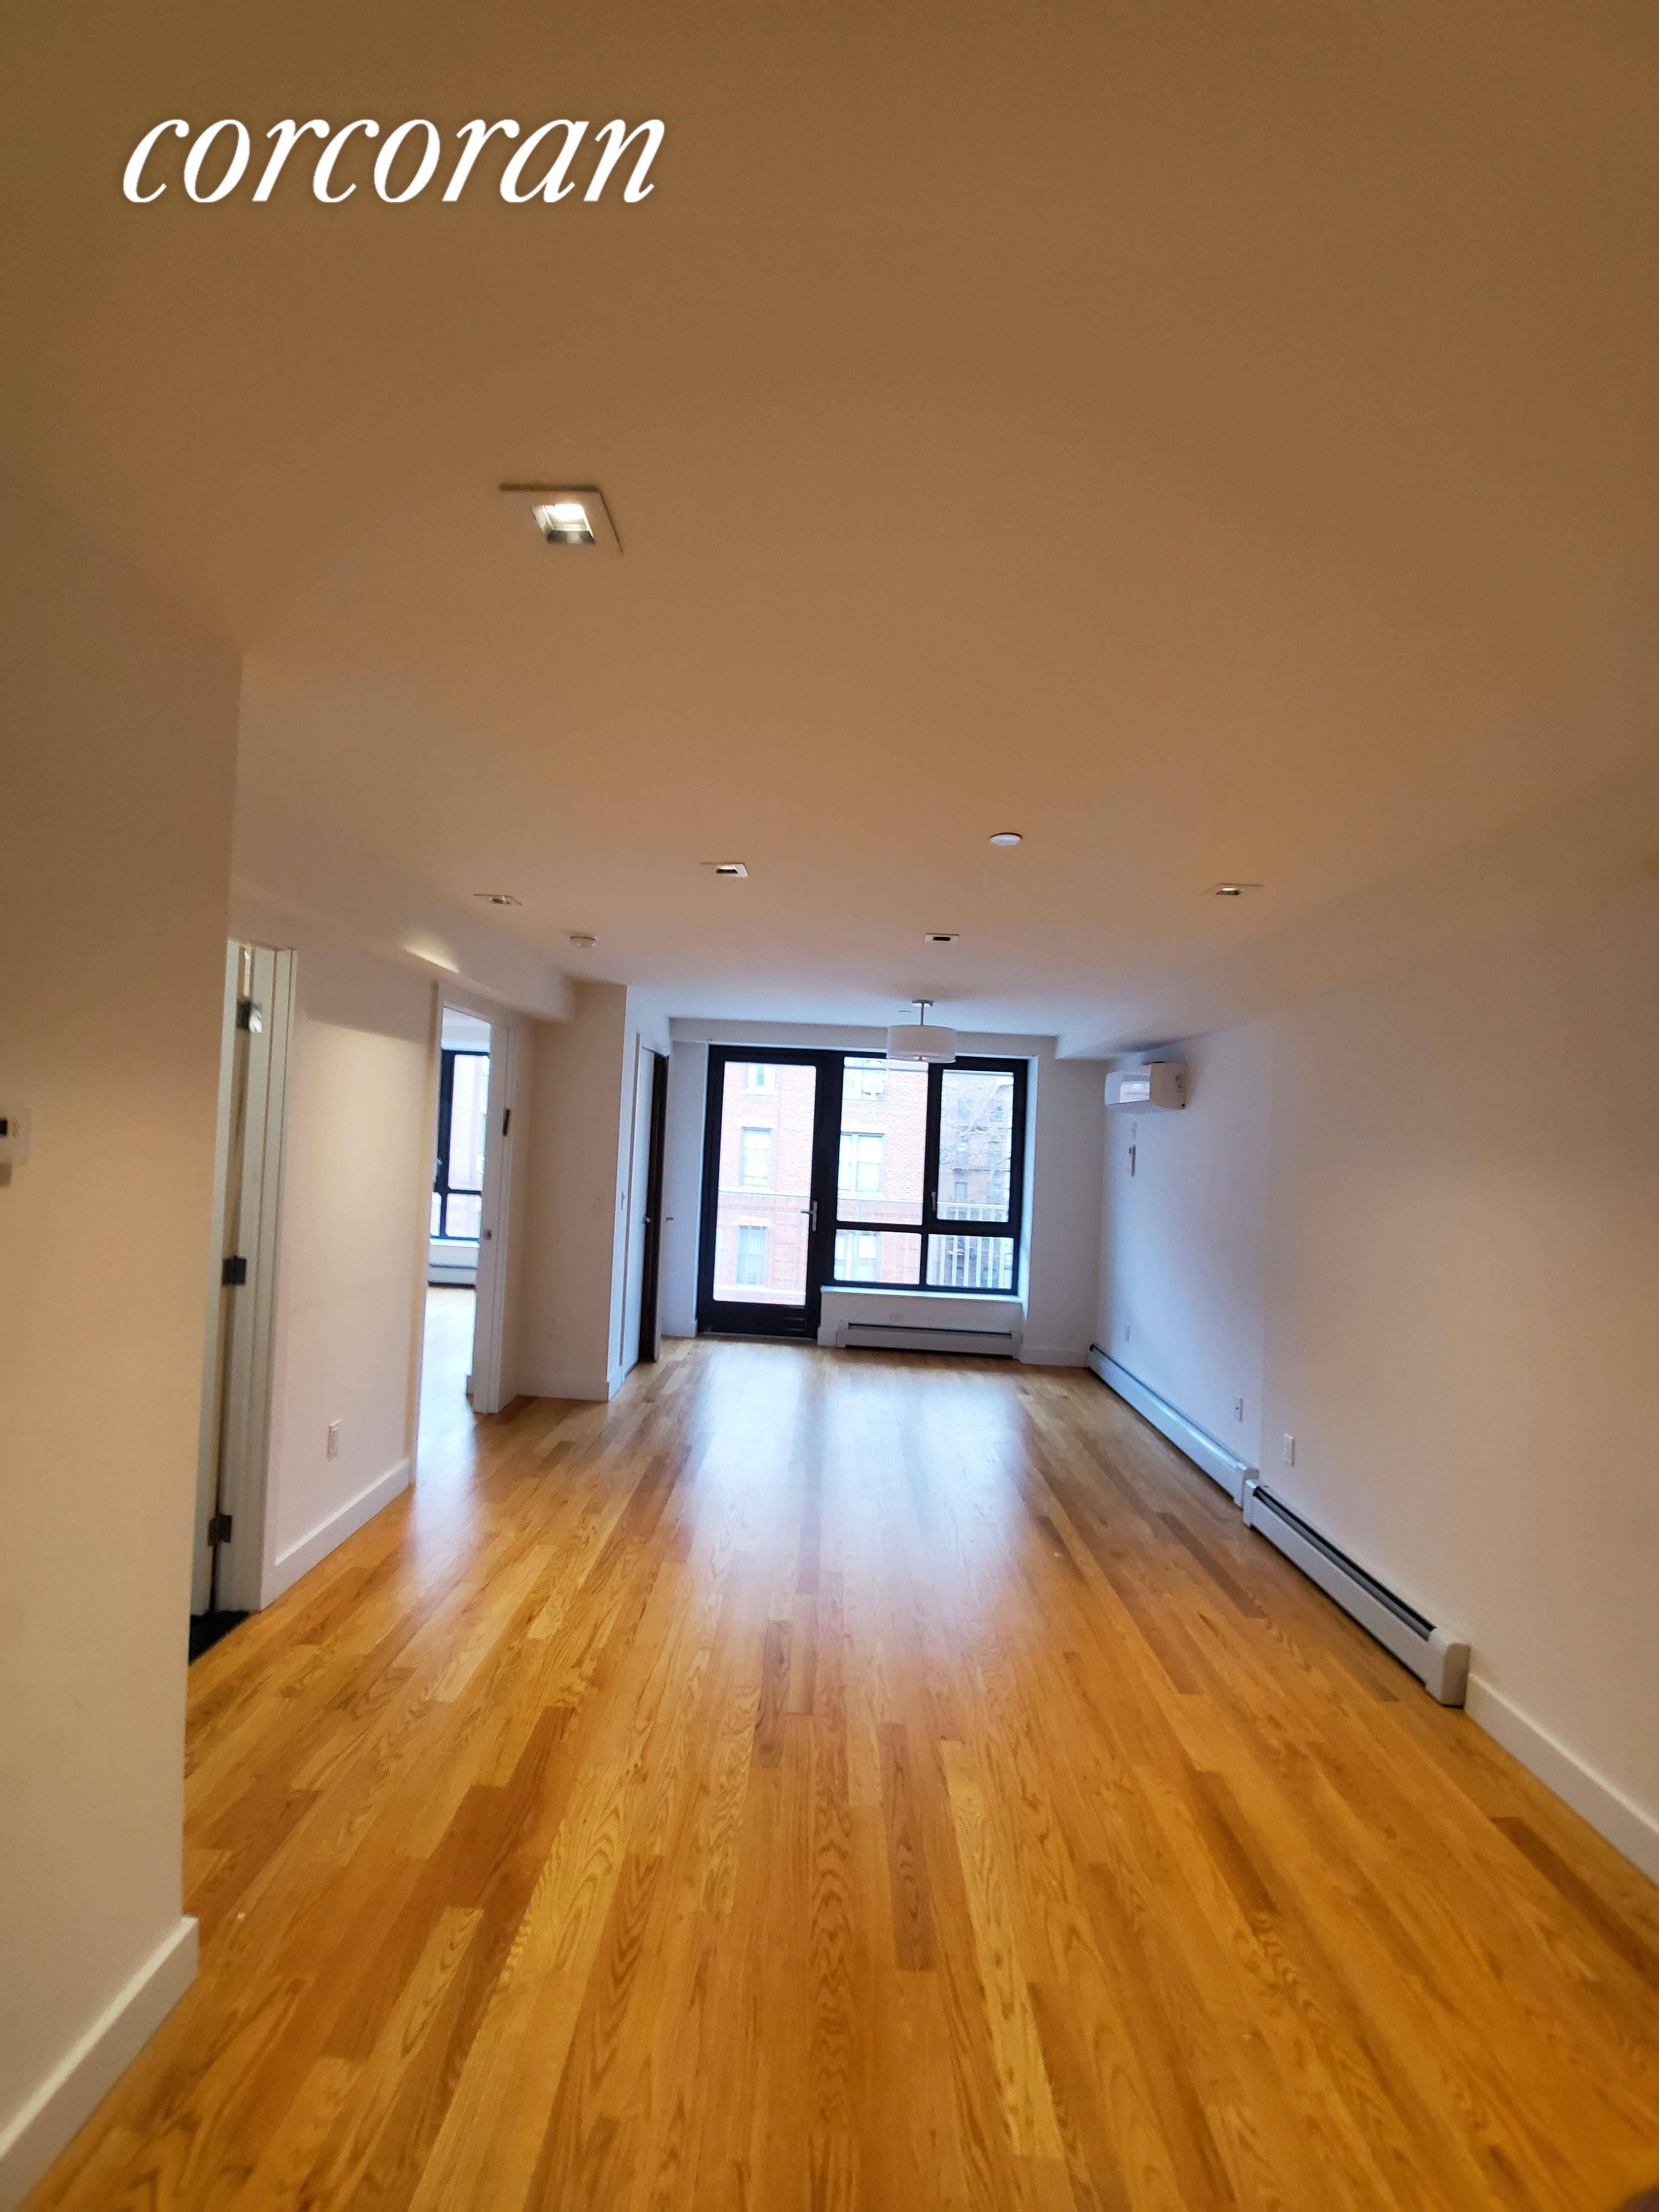 24 unit boutique building situated near Prospect Park and nestled between two quiet tree lined blocks offering a modern and sleek take on Brooklyn living.